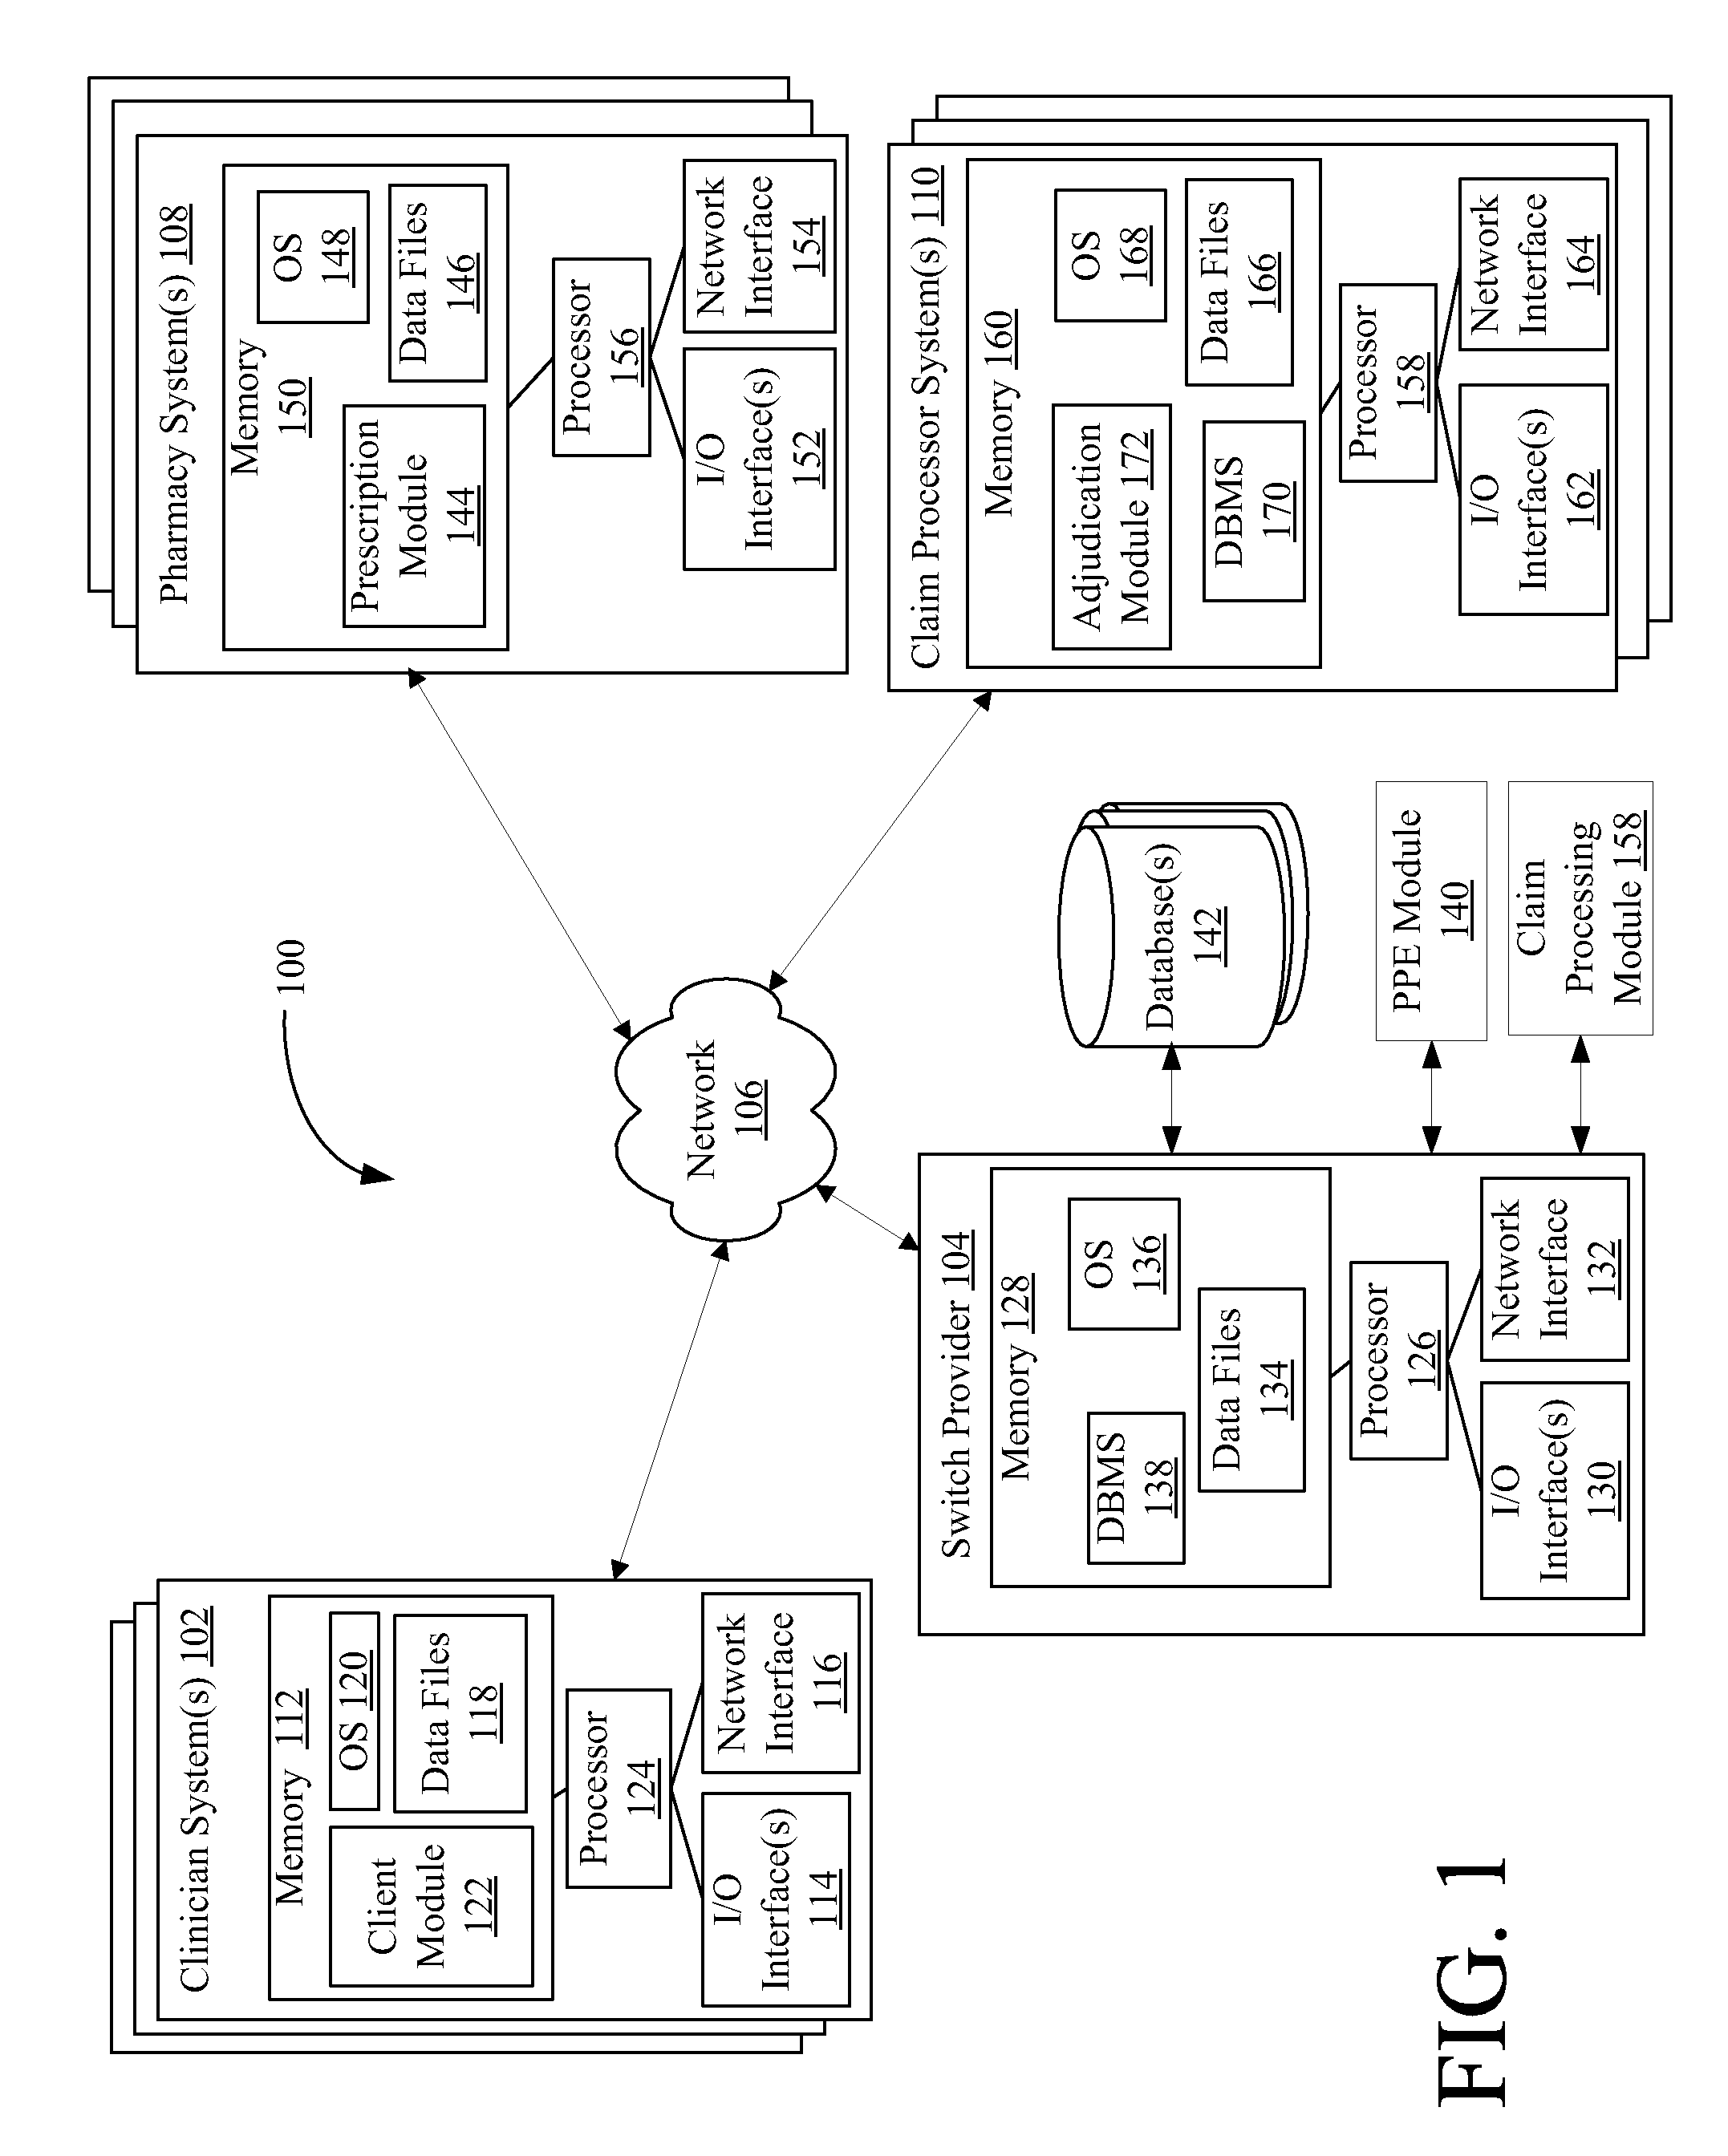 Systems and Methods for Providing Drug Samples to Patients